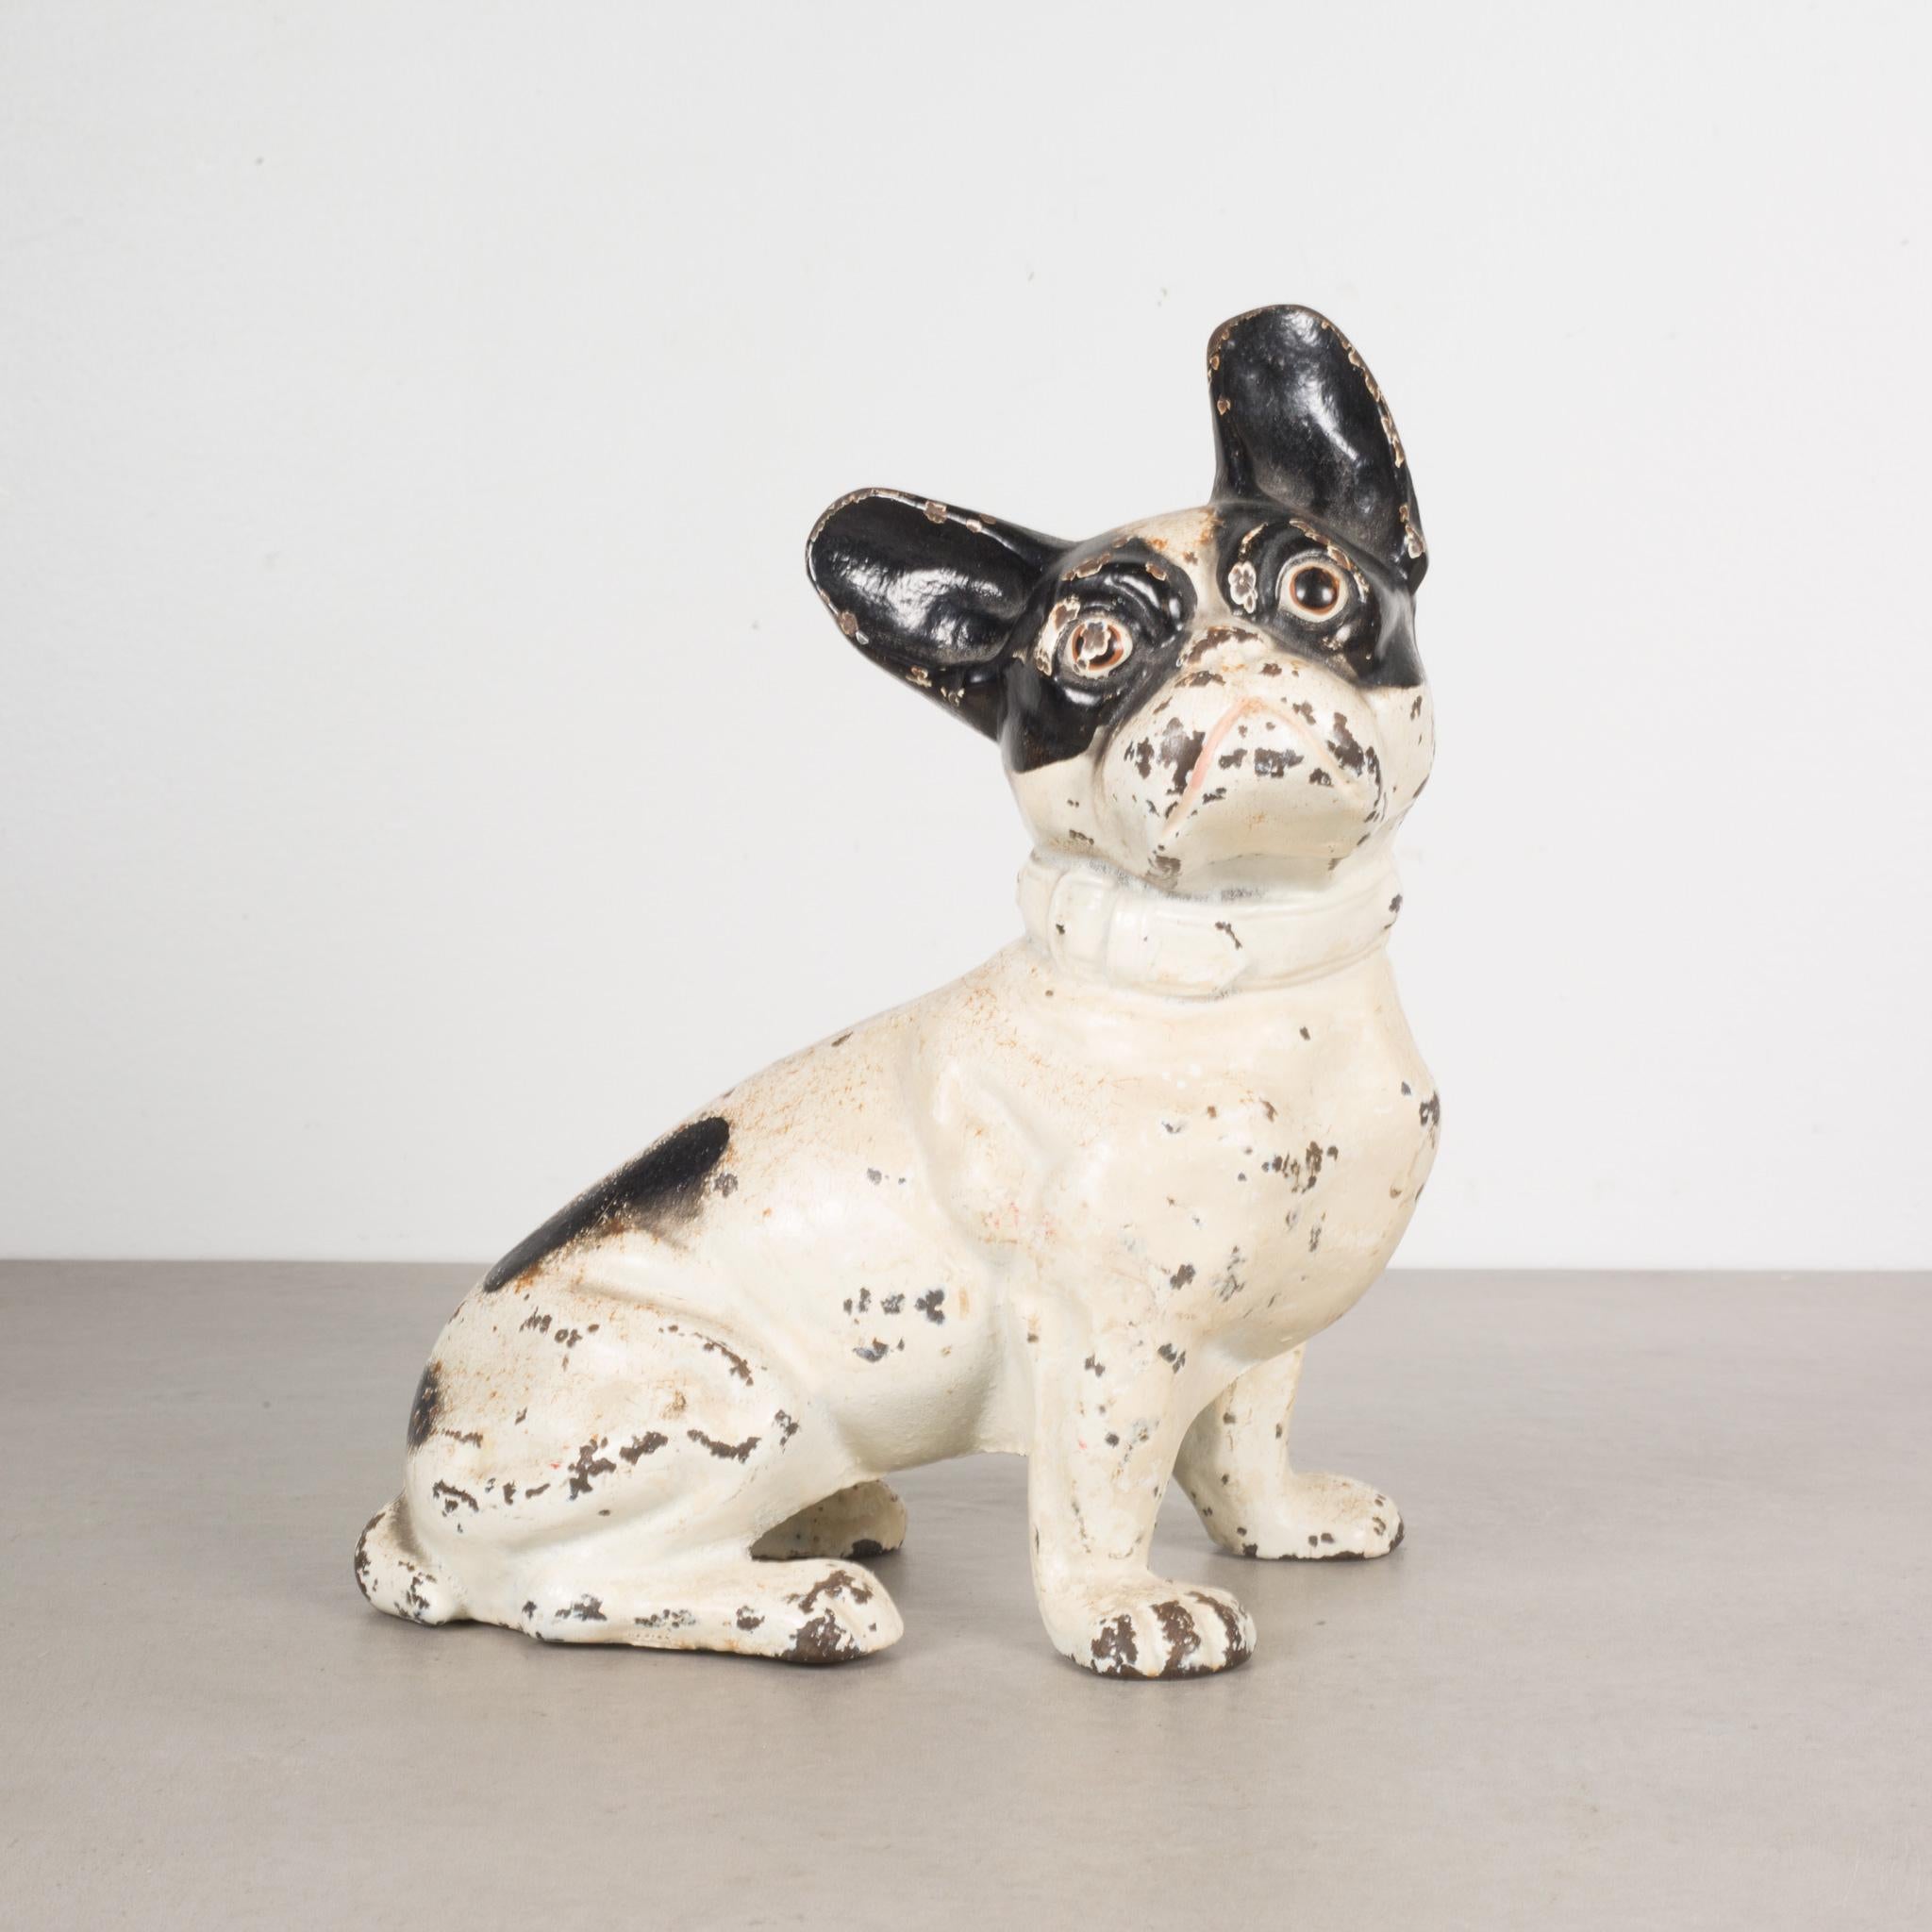 ABOUT

An original cast iron French Bulldog doorstop manufactured by the Hubley Manufacturing Company in Lancaster Pennsylvania USA. The piece has retained its original hand painted finish and is in excellent condition with the appropriate patina